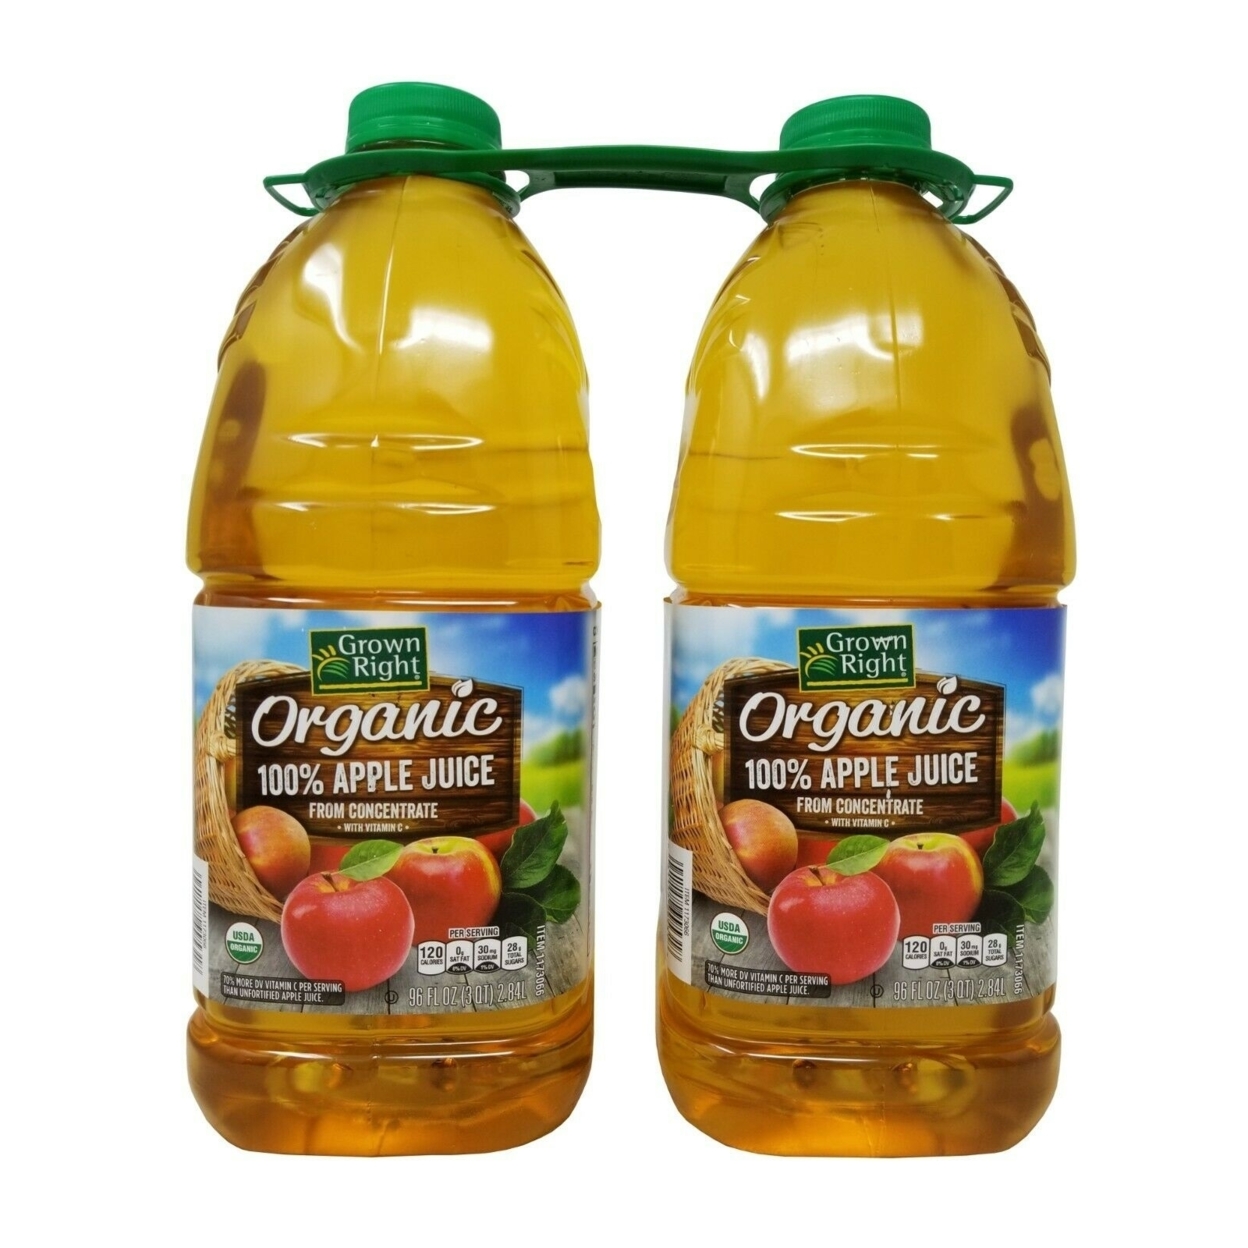 Grown Right Organic 100% Apple Juice, 96 Fluid Ounce (Pack Of 2)